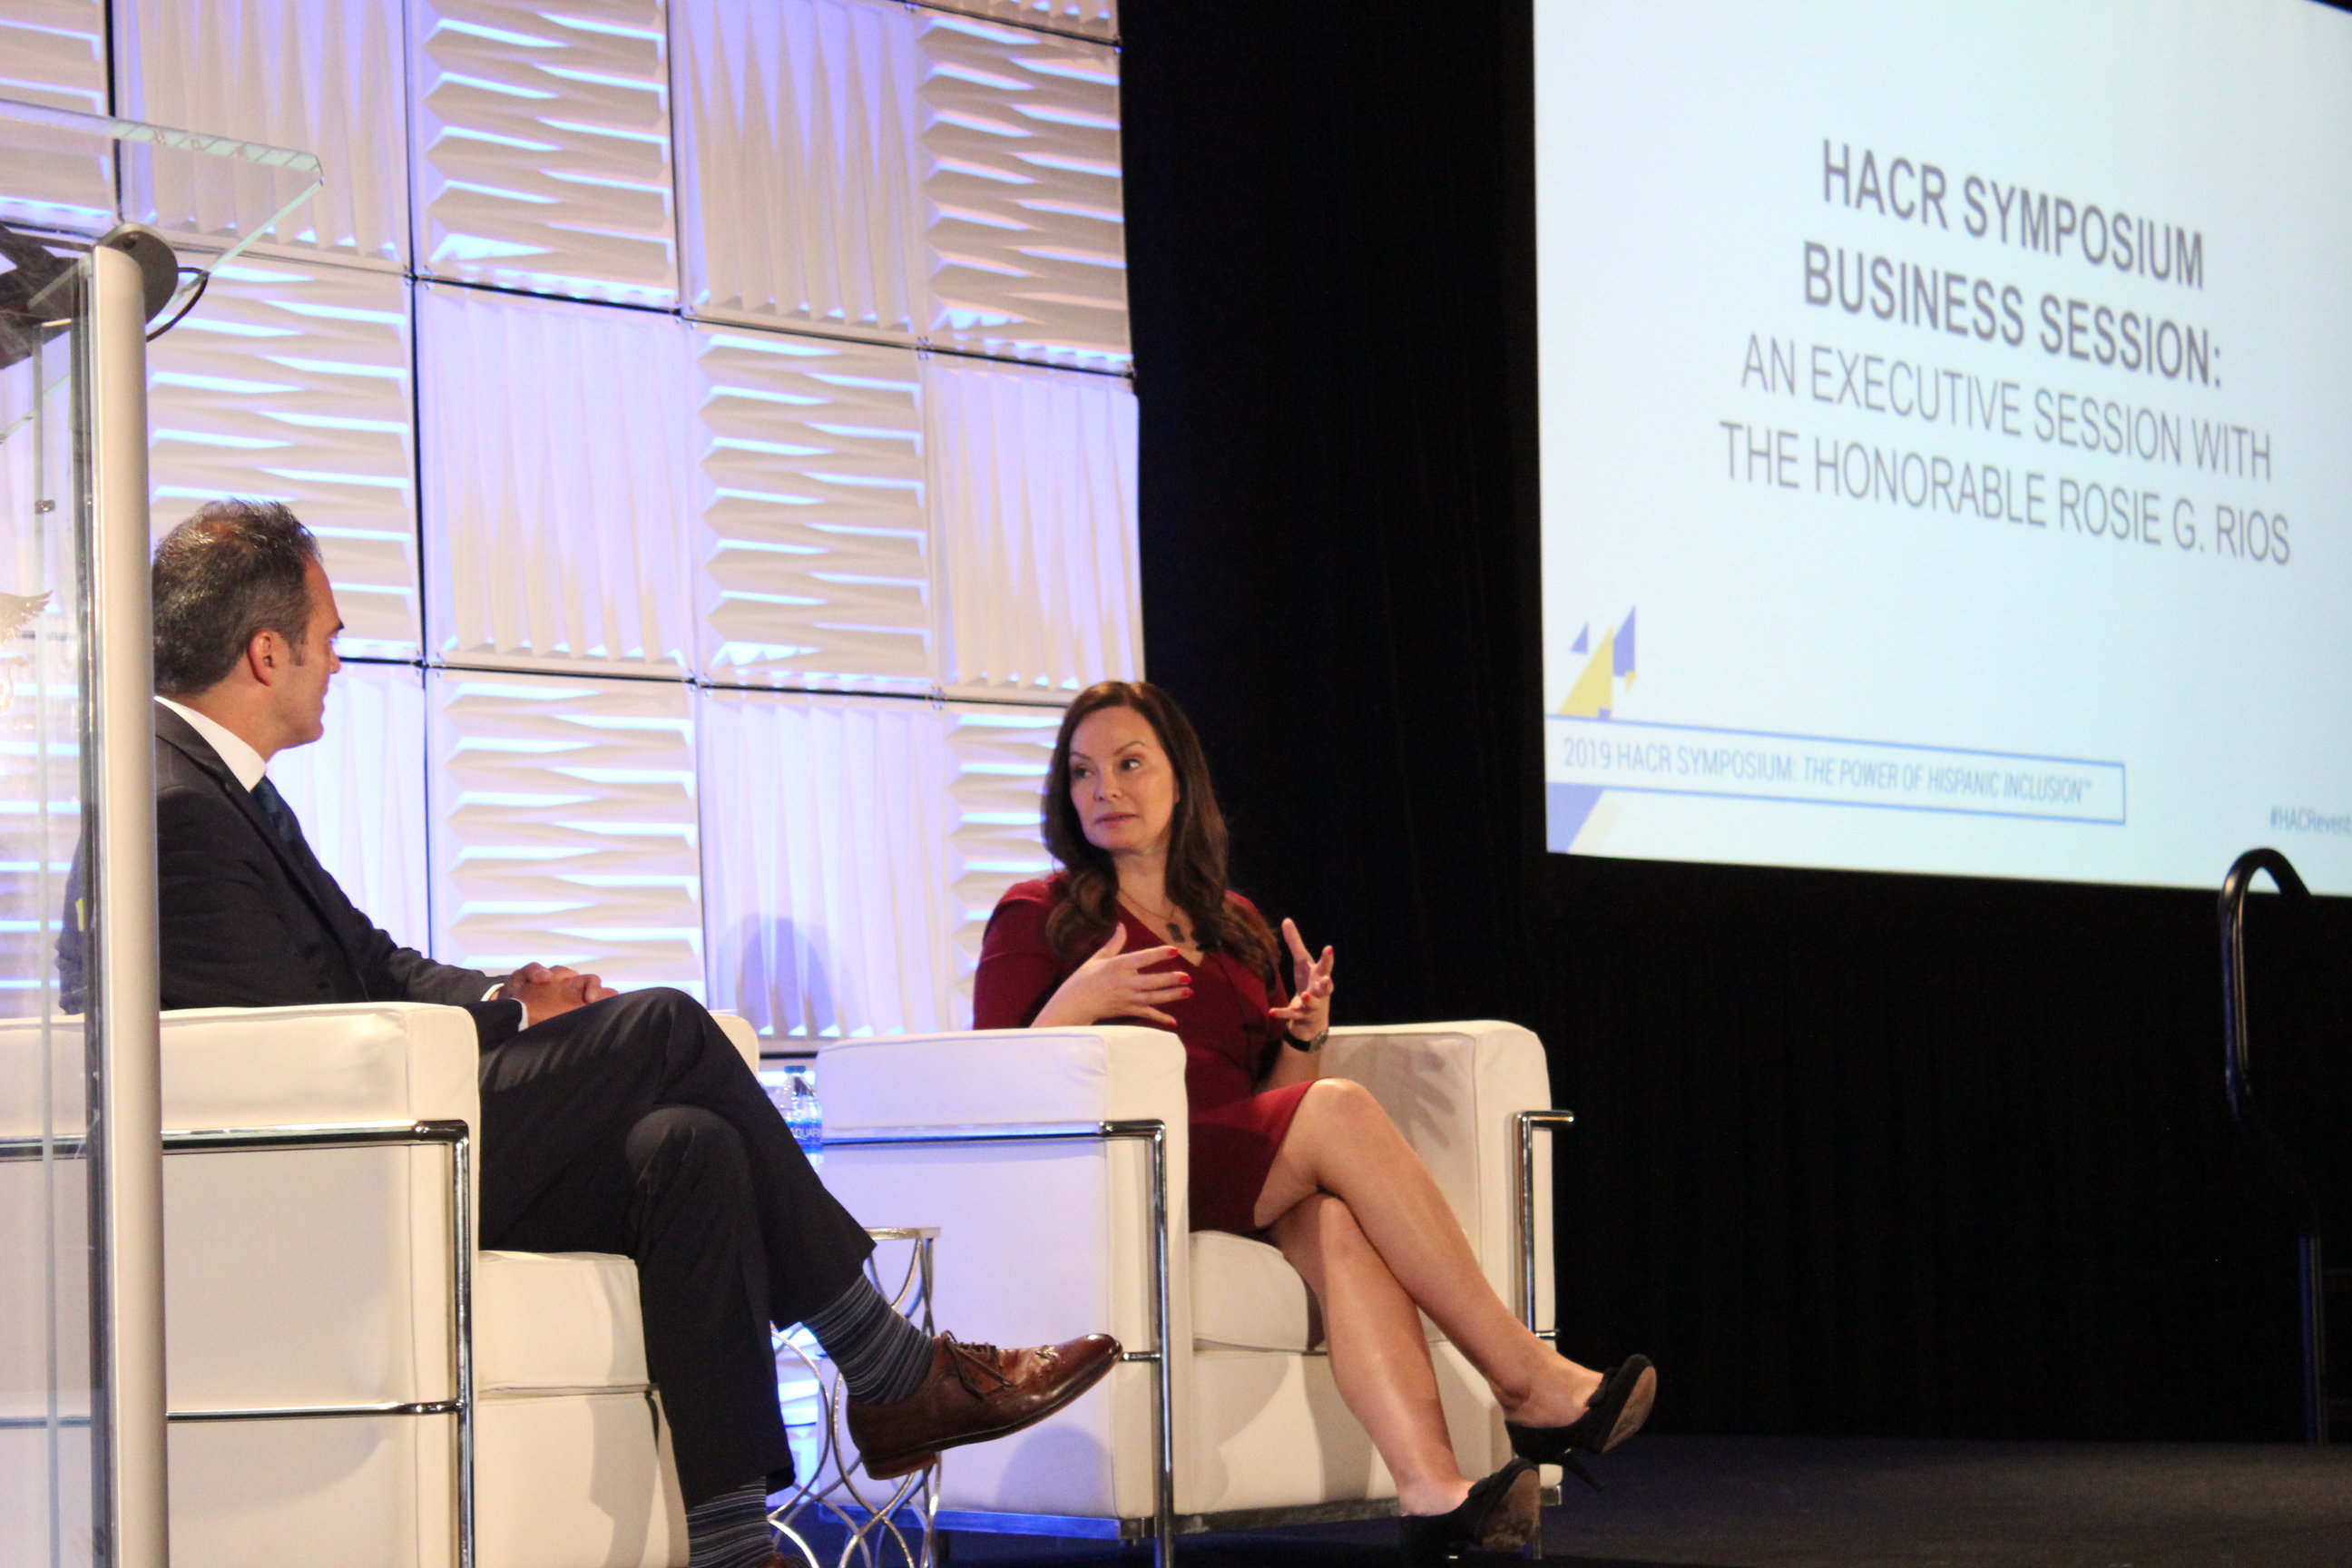 An executive session with The Honorable Rosie G. Rios during the HACR Symposium. Photo: Keyvan Antonio Heydari